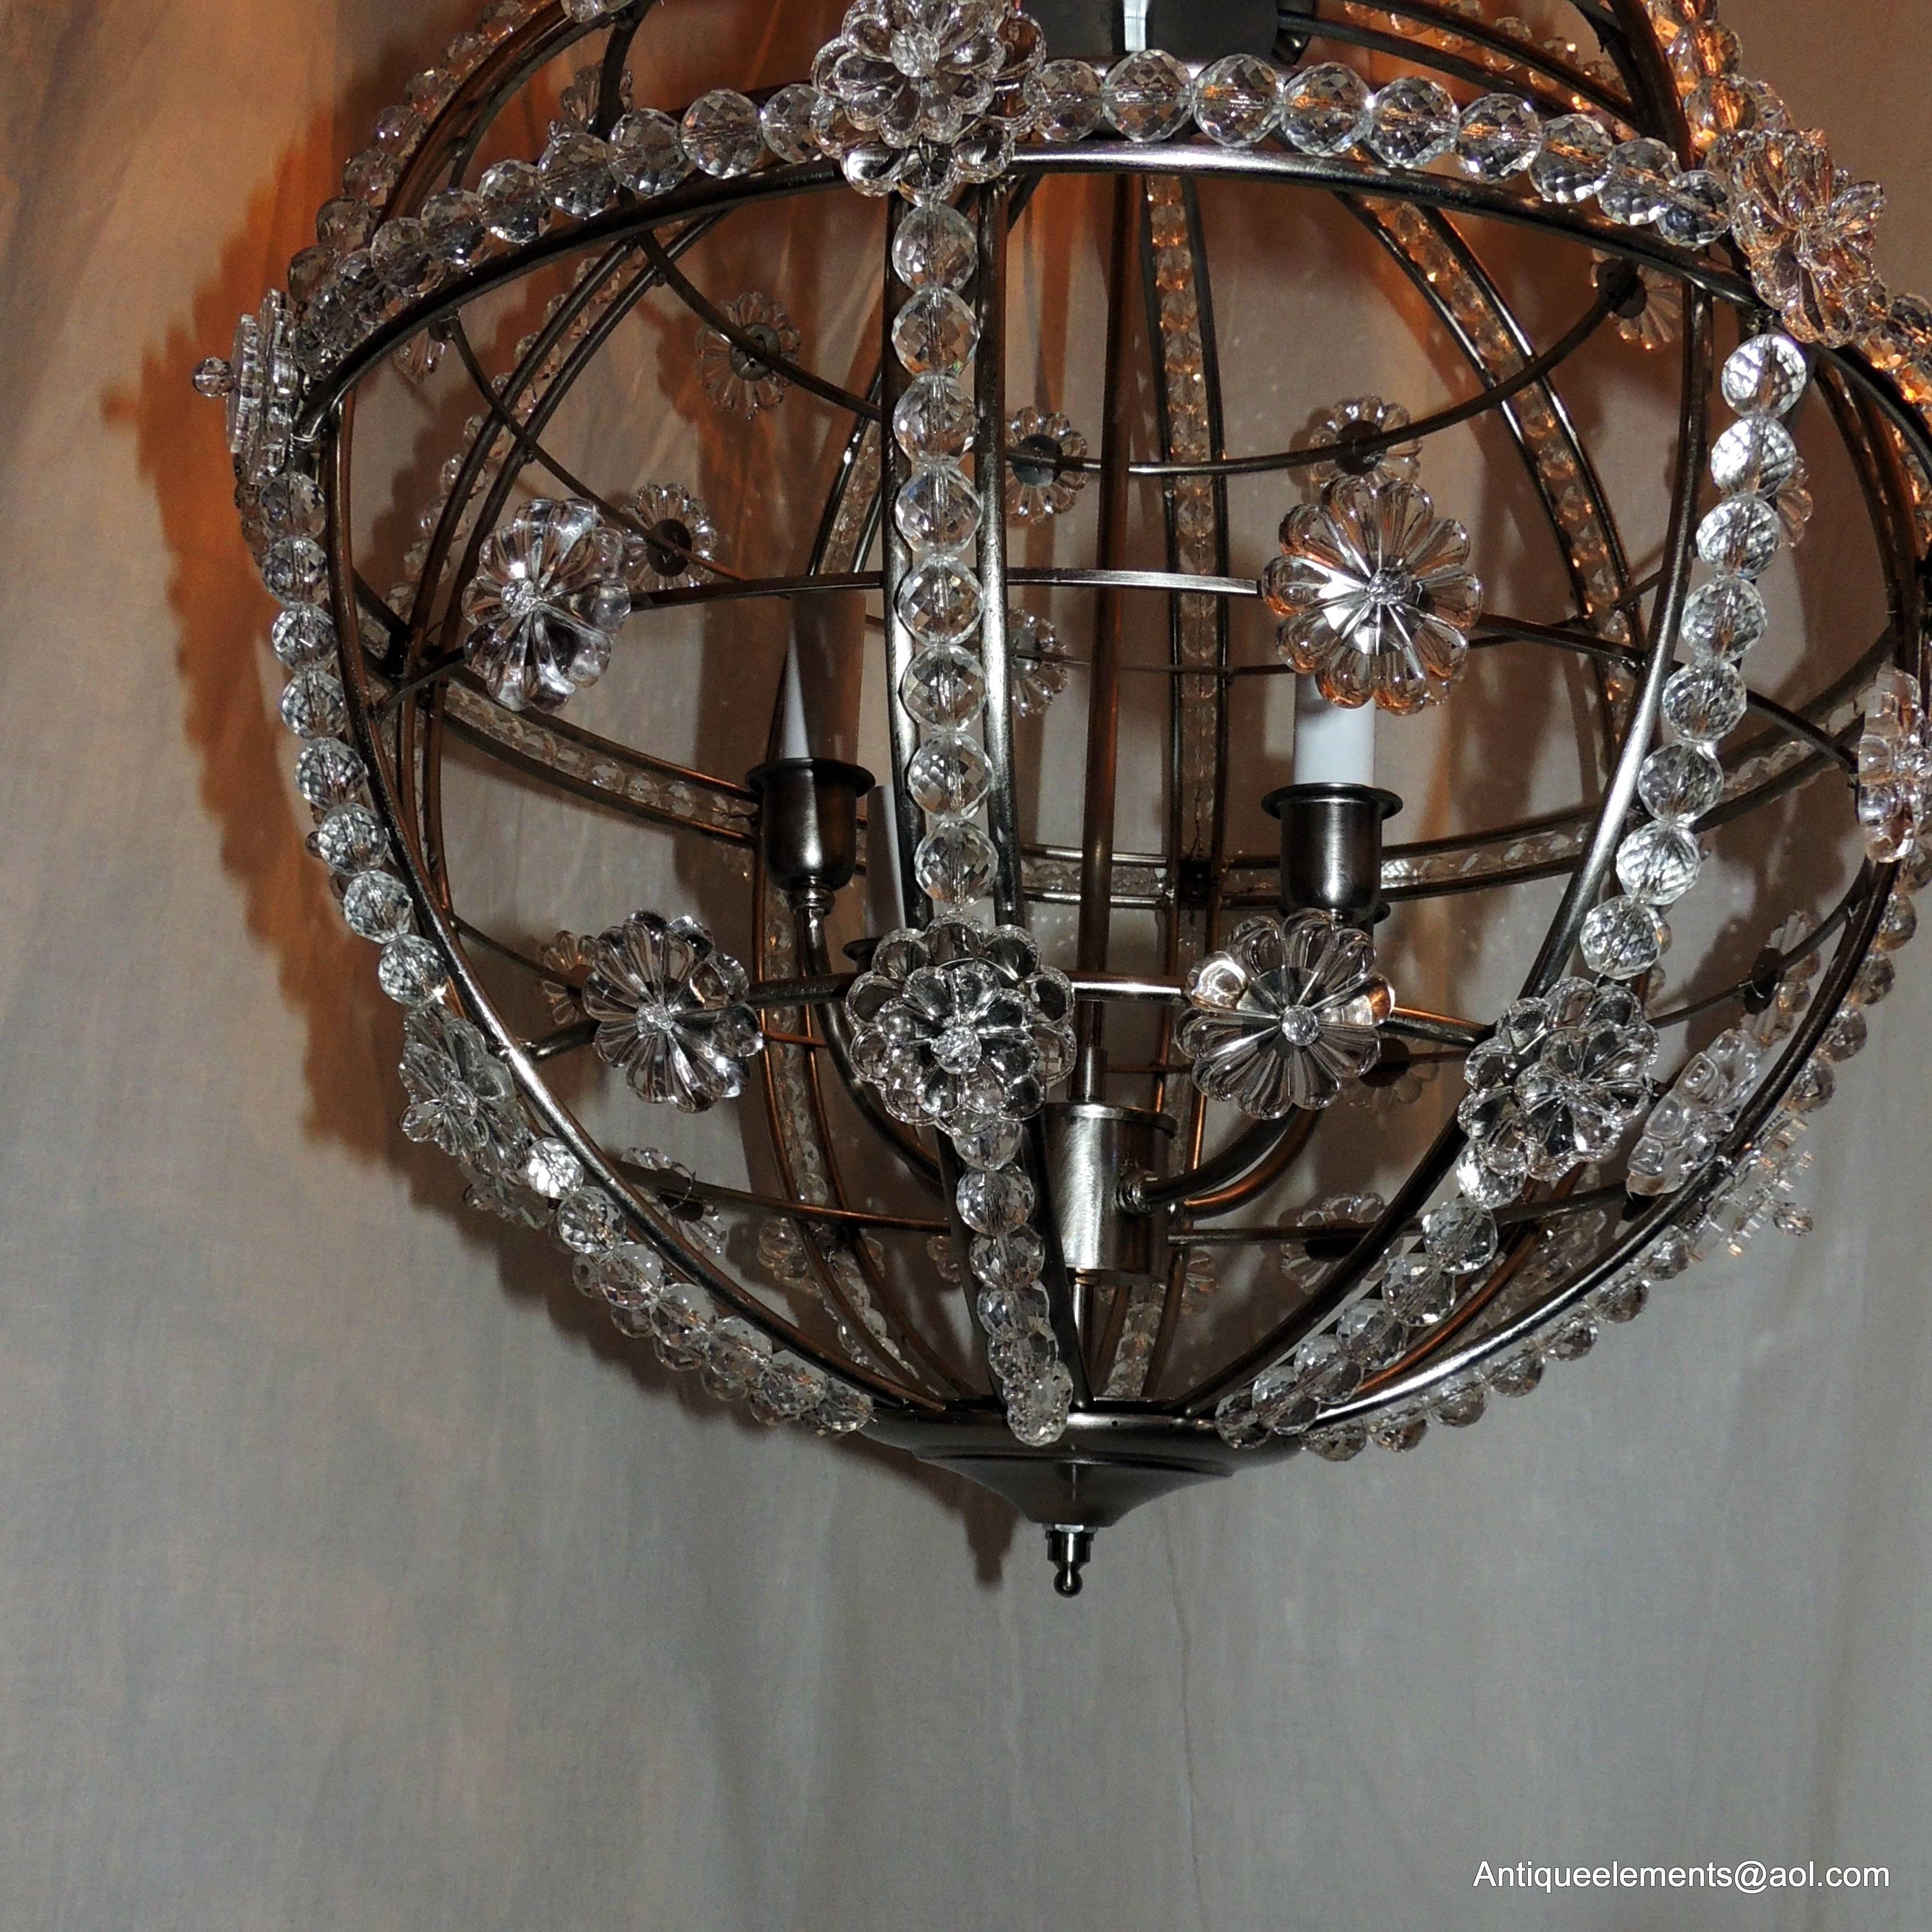 Modern Transitional Brushed Nickel Sputnik Rock Crystal Ball Chandelier Fixture In Good Condition For Sale In Roslyn, NY